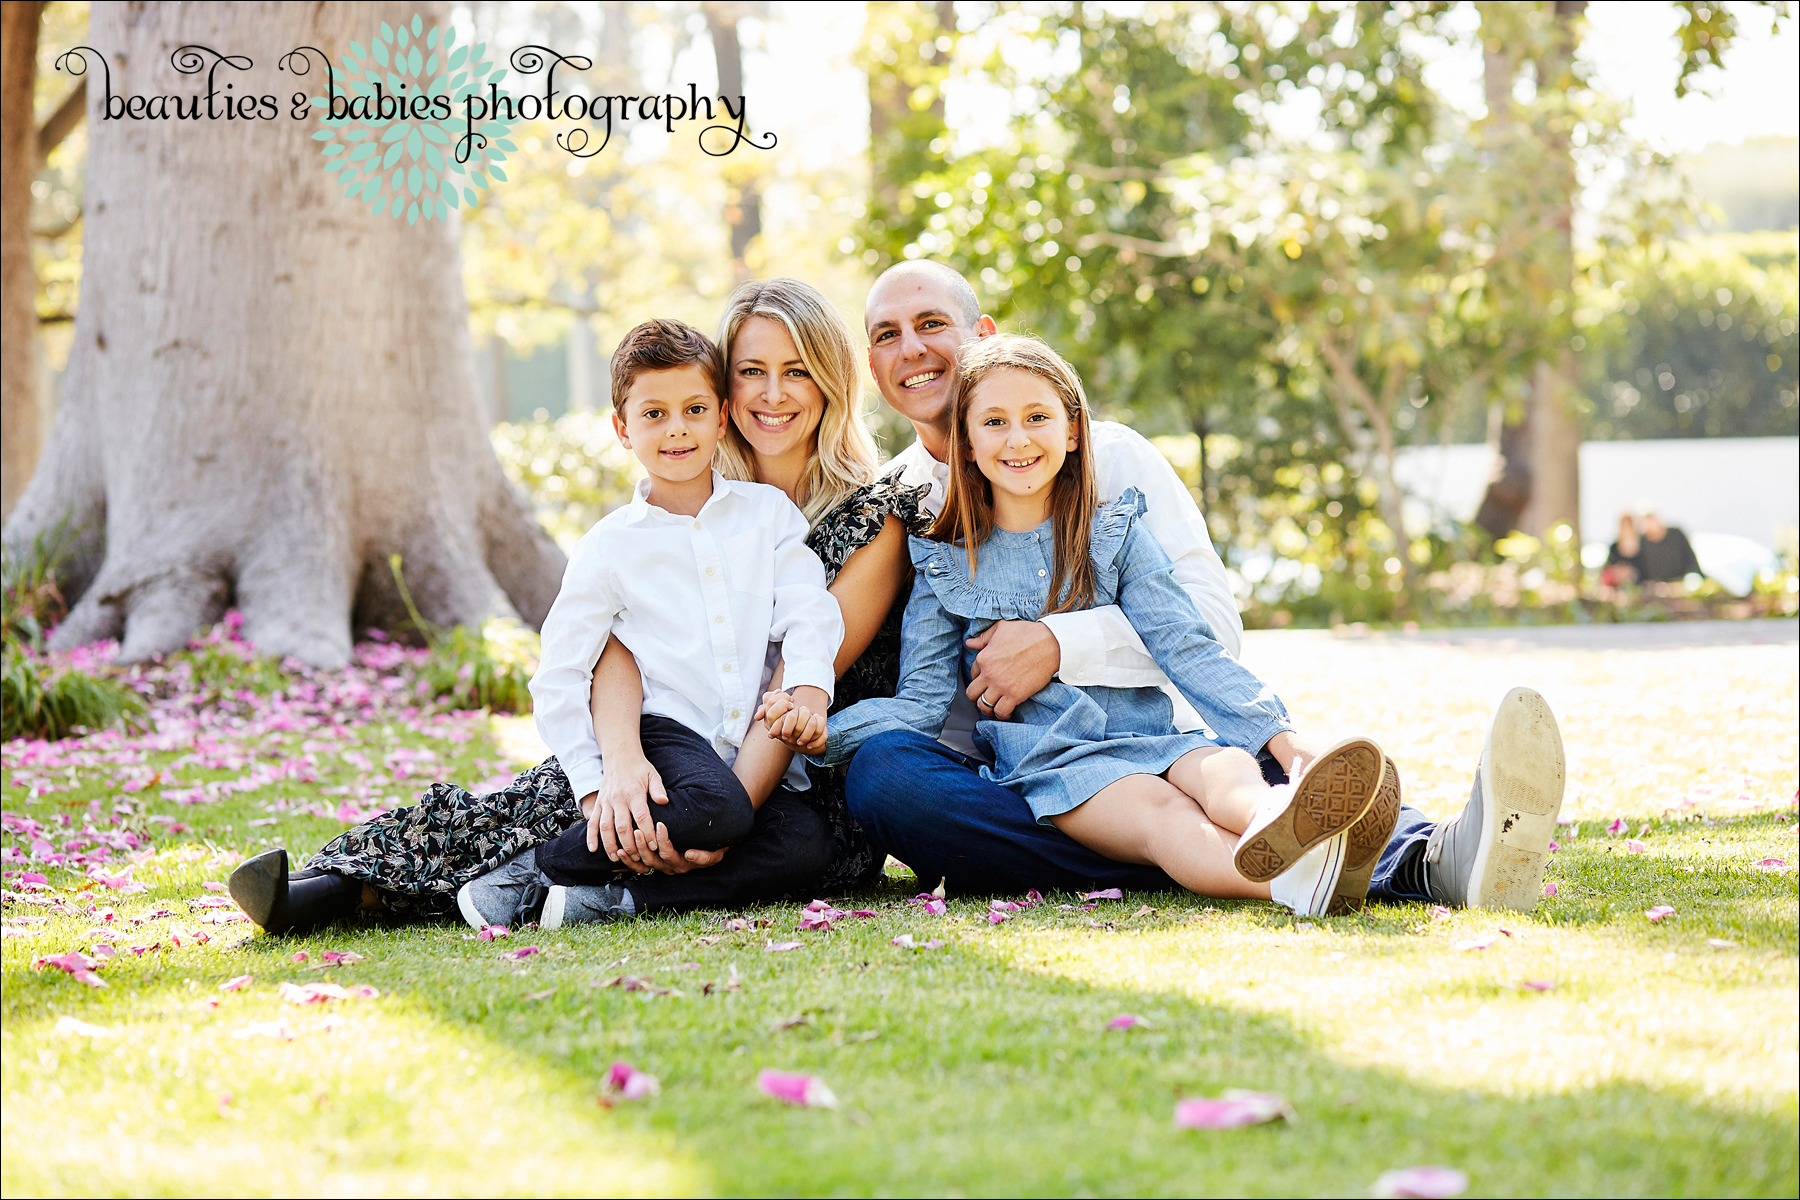 Outdoor Family and children's photography Los Angeles professional photographer